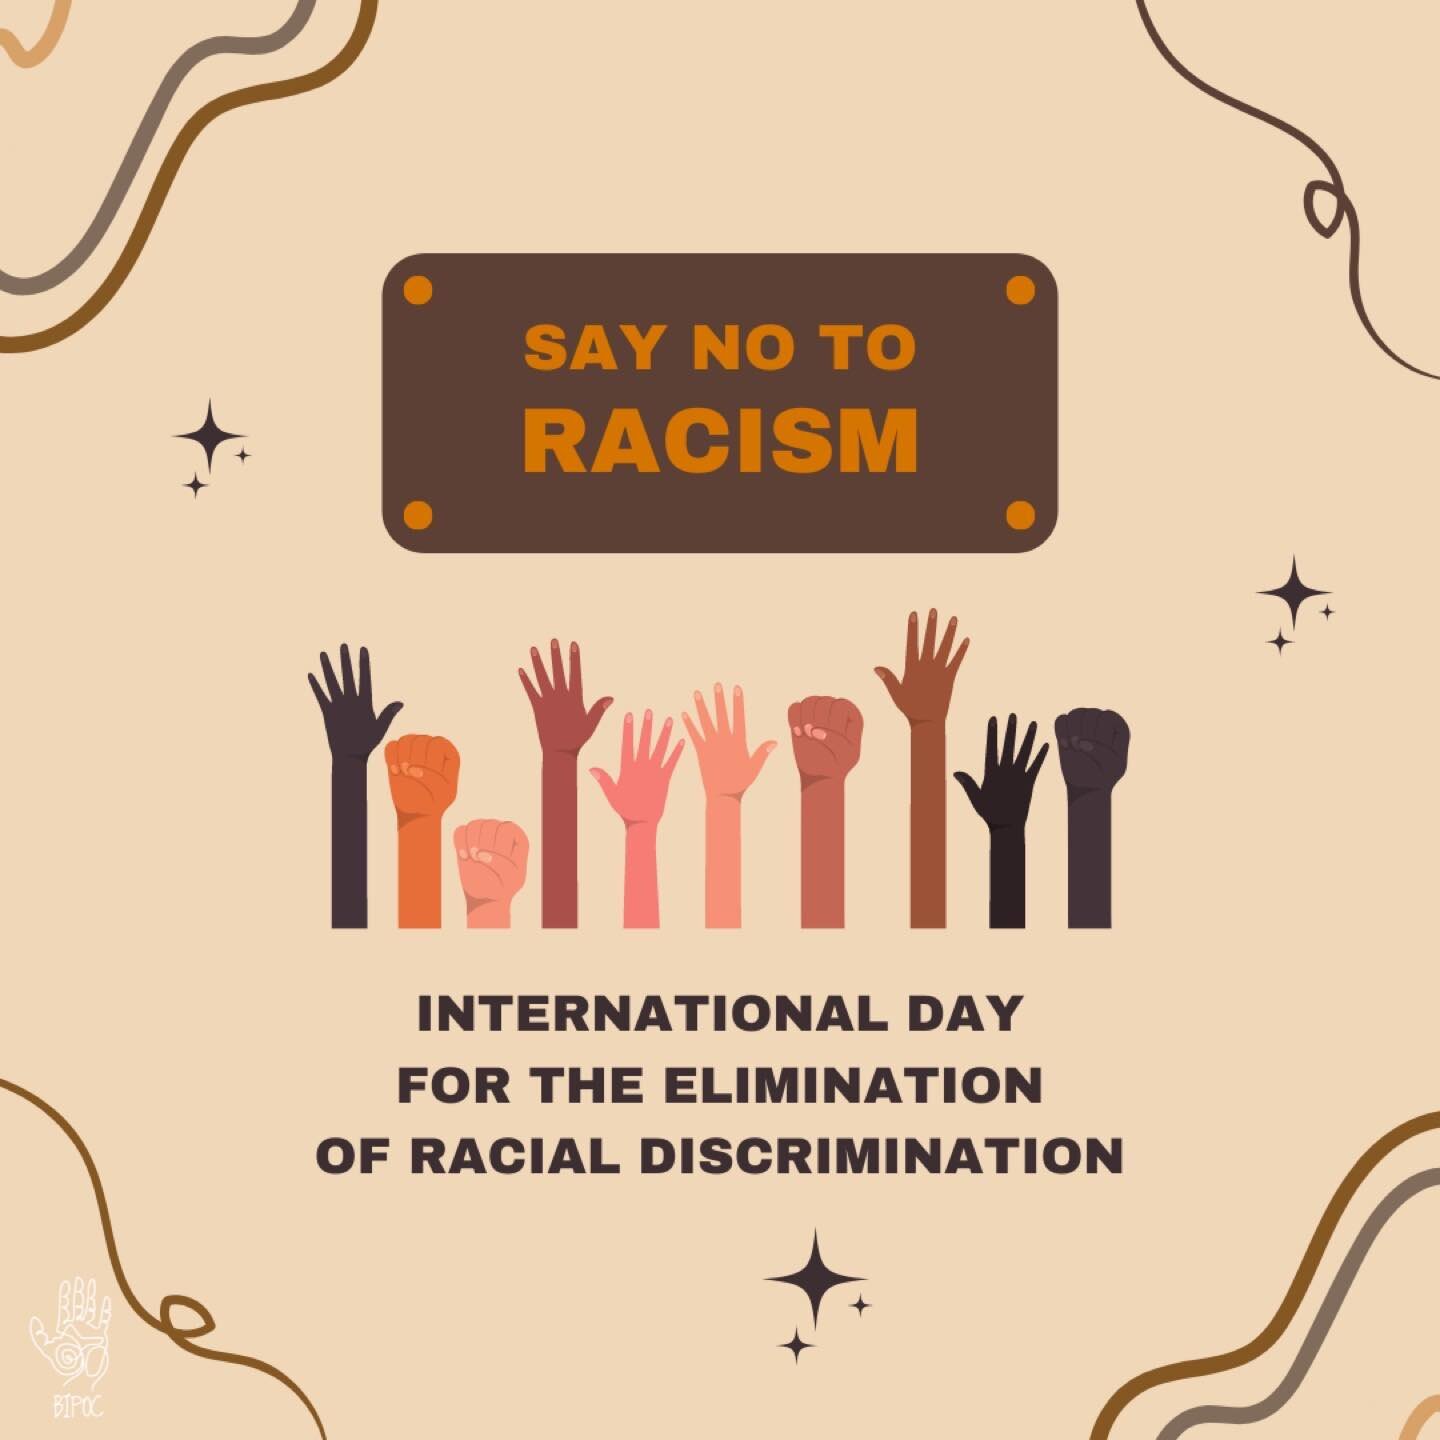 The International Day for the Elimination of Racial Discrimination recognizes that the injustices and prejudices fueled by racial discrimination take place every day. Together we can speak out against racism, and move towards equality, dignity, and r